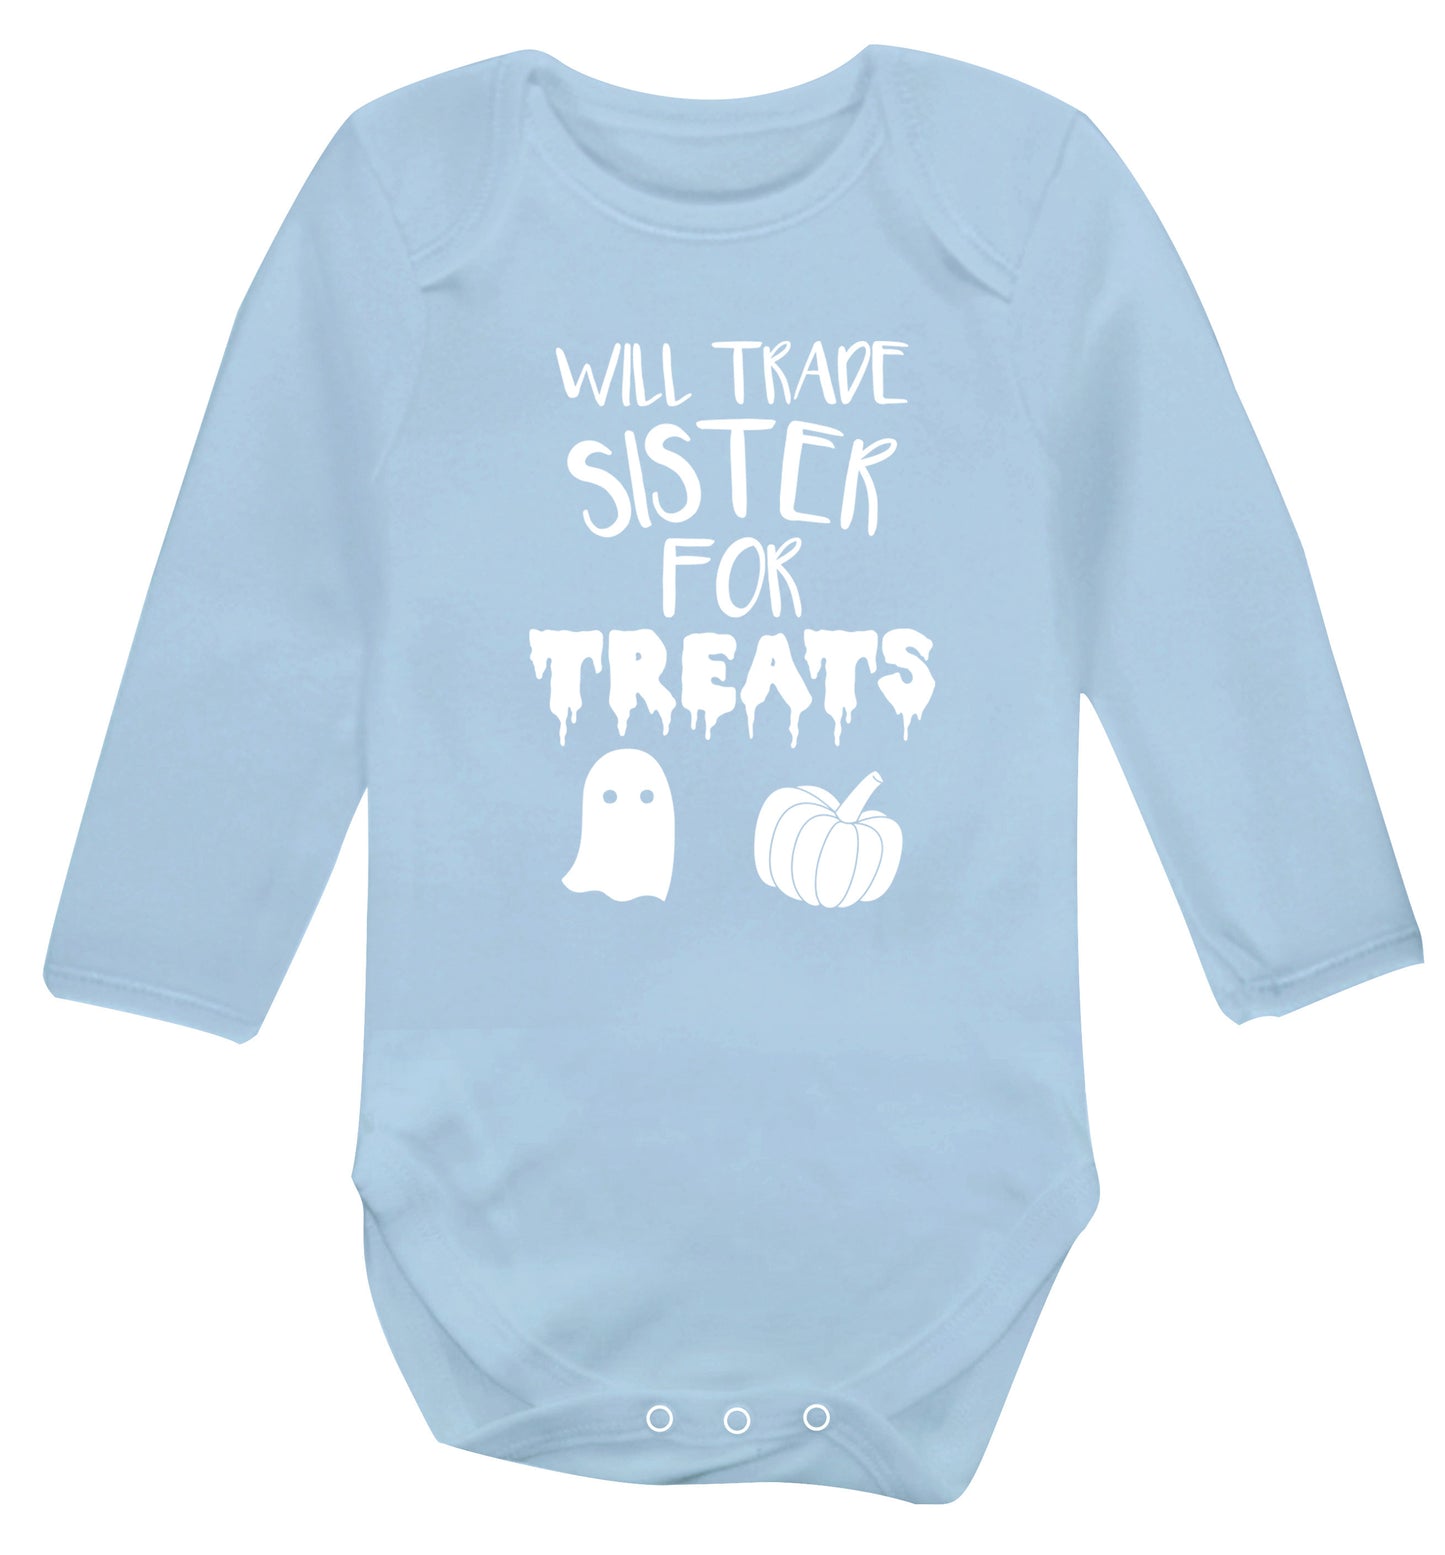 Will trade sister for treats Baby Vest long sleeved pale blue 6-12 months